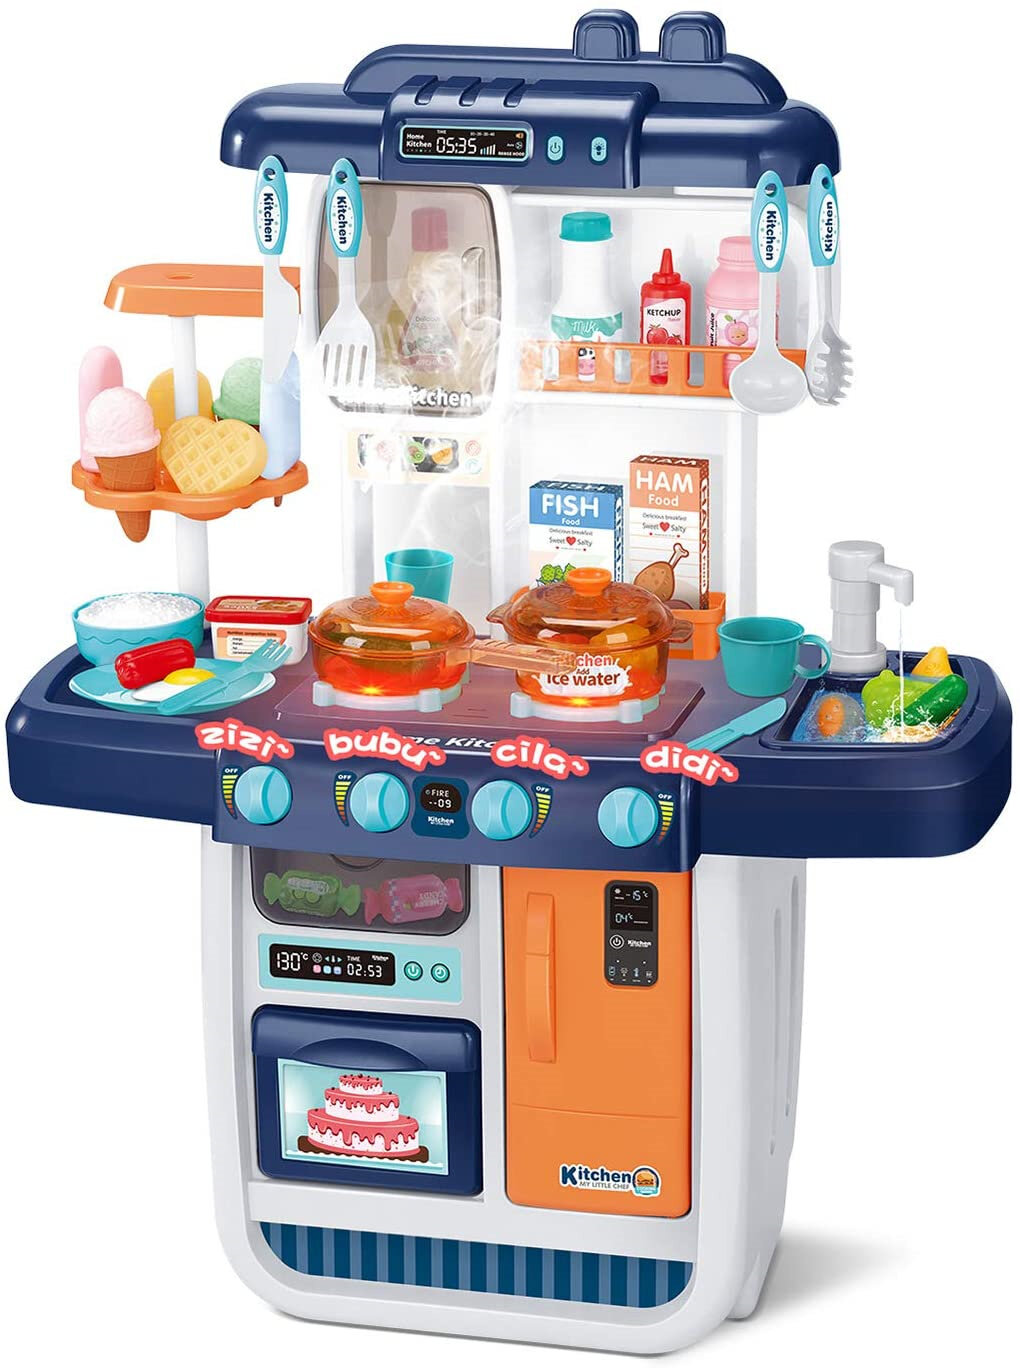 Details about   Kids Girls Play Kitchen Sink Toys Electric Dishwasher Playing Sink Pretend Play 